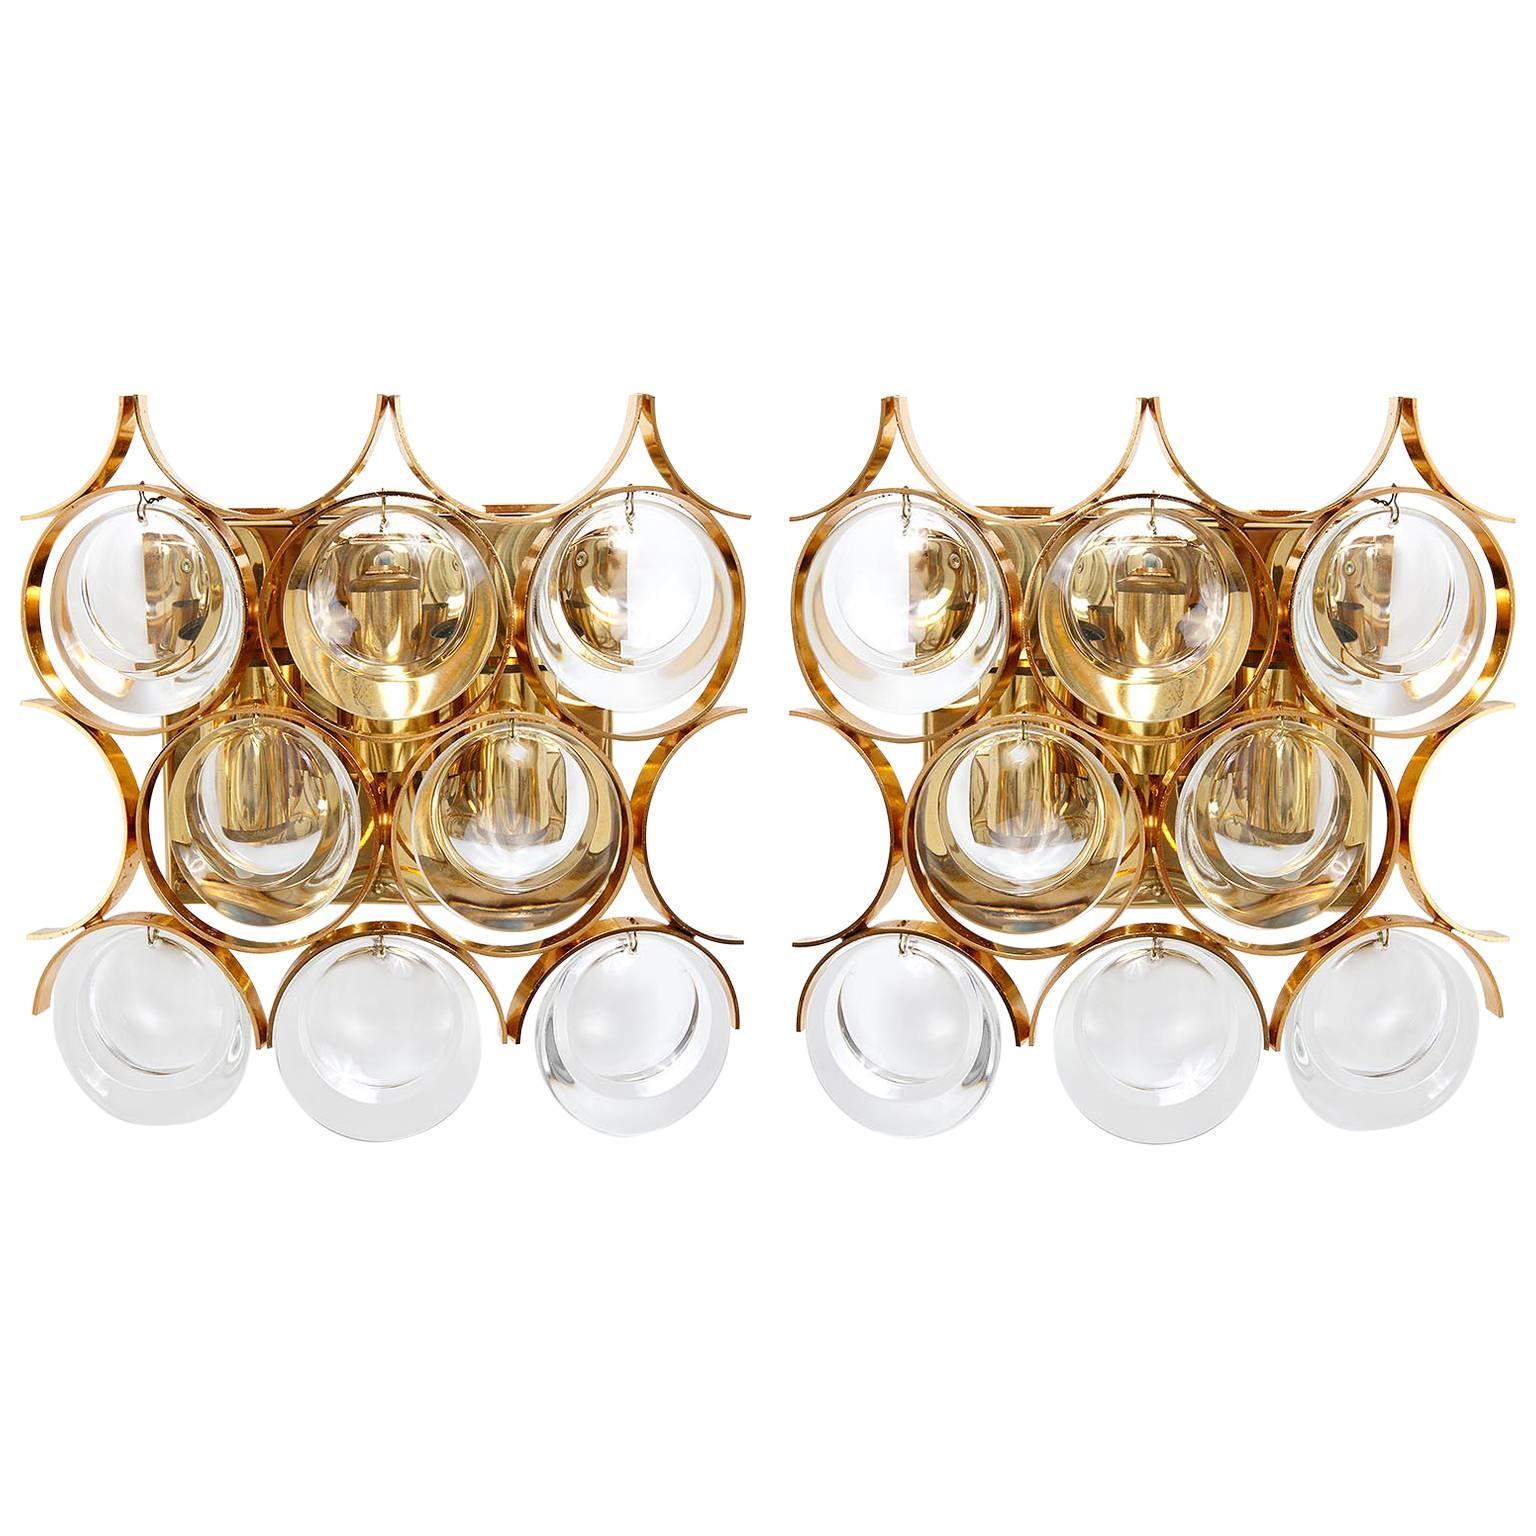 One of four wall lights by Palwa (Palme and Walter), Germany, manufactured in midcentury, circa 1970 (1960s-1970s). They are made of gilded or gilt or gold-plated brass and large round lens glasses. Each lamp takes three small screw base bulbs (type